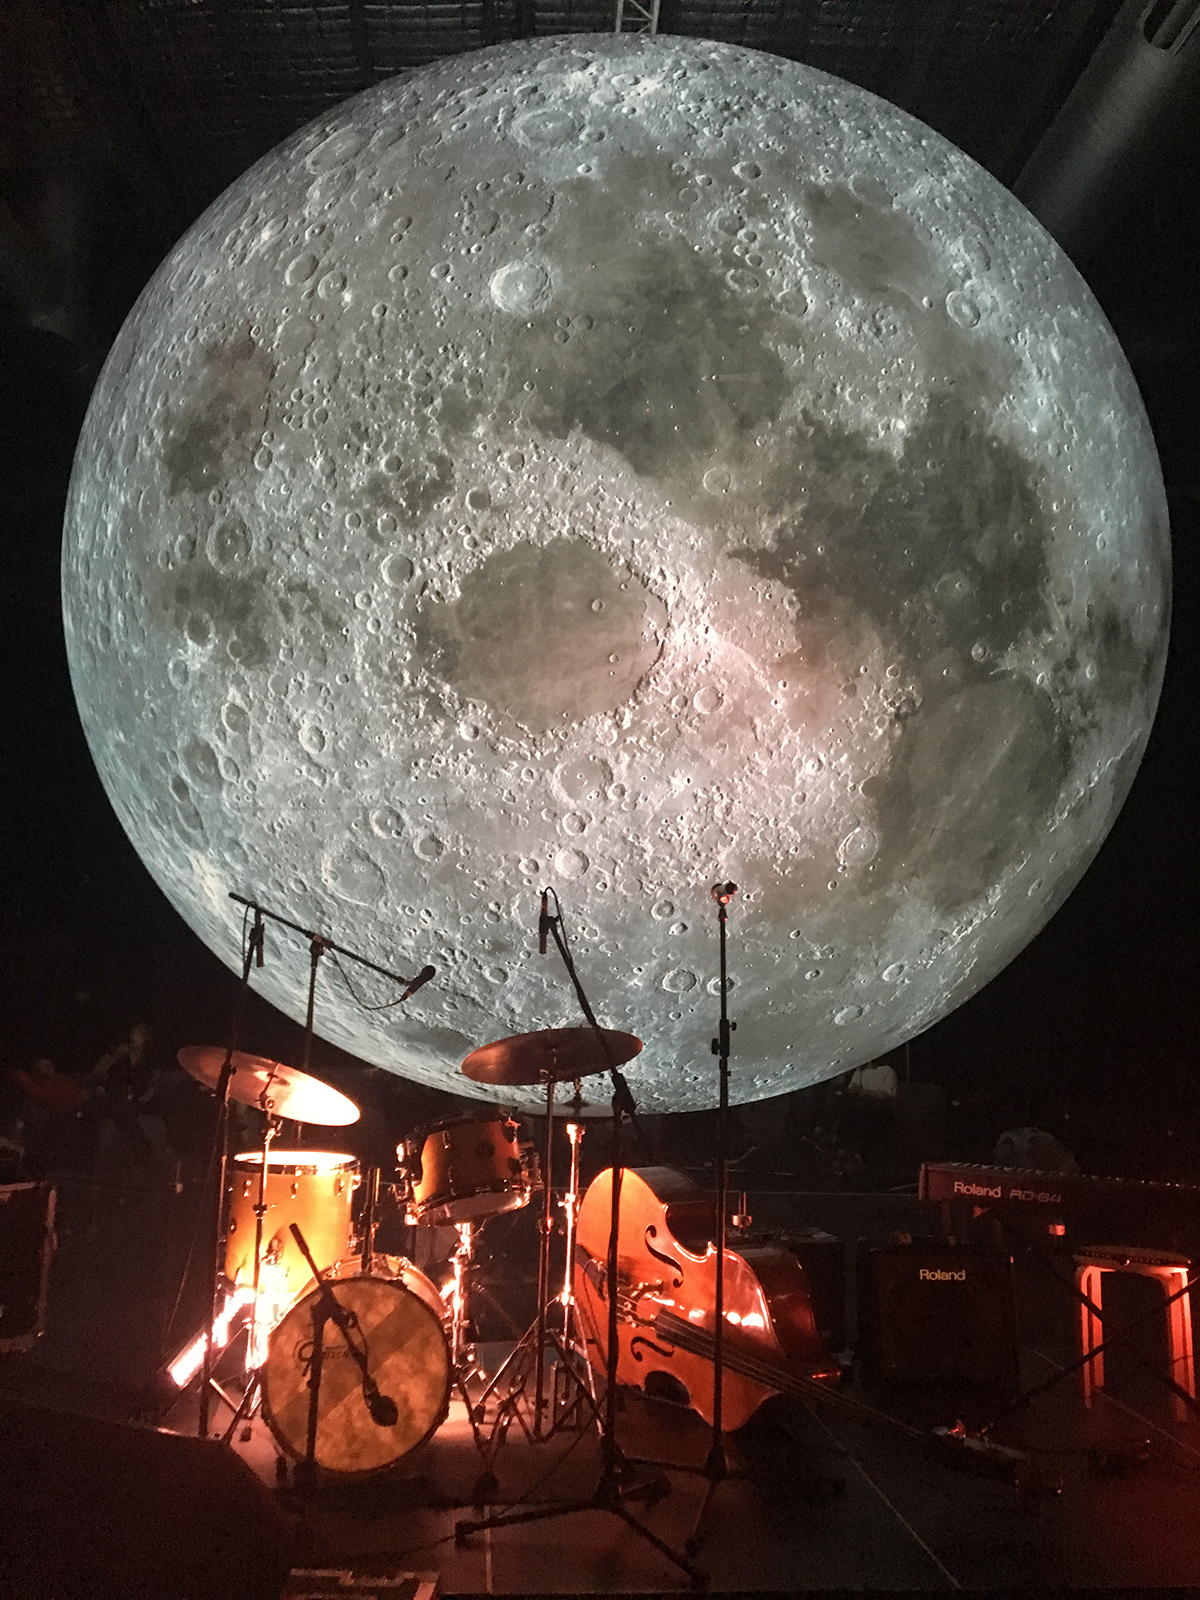 moon sculpture in light with band equipment in red light beneath